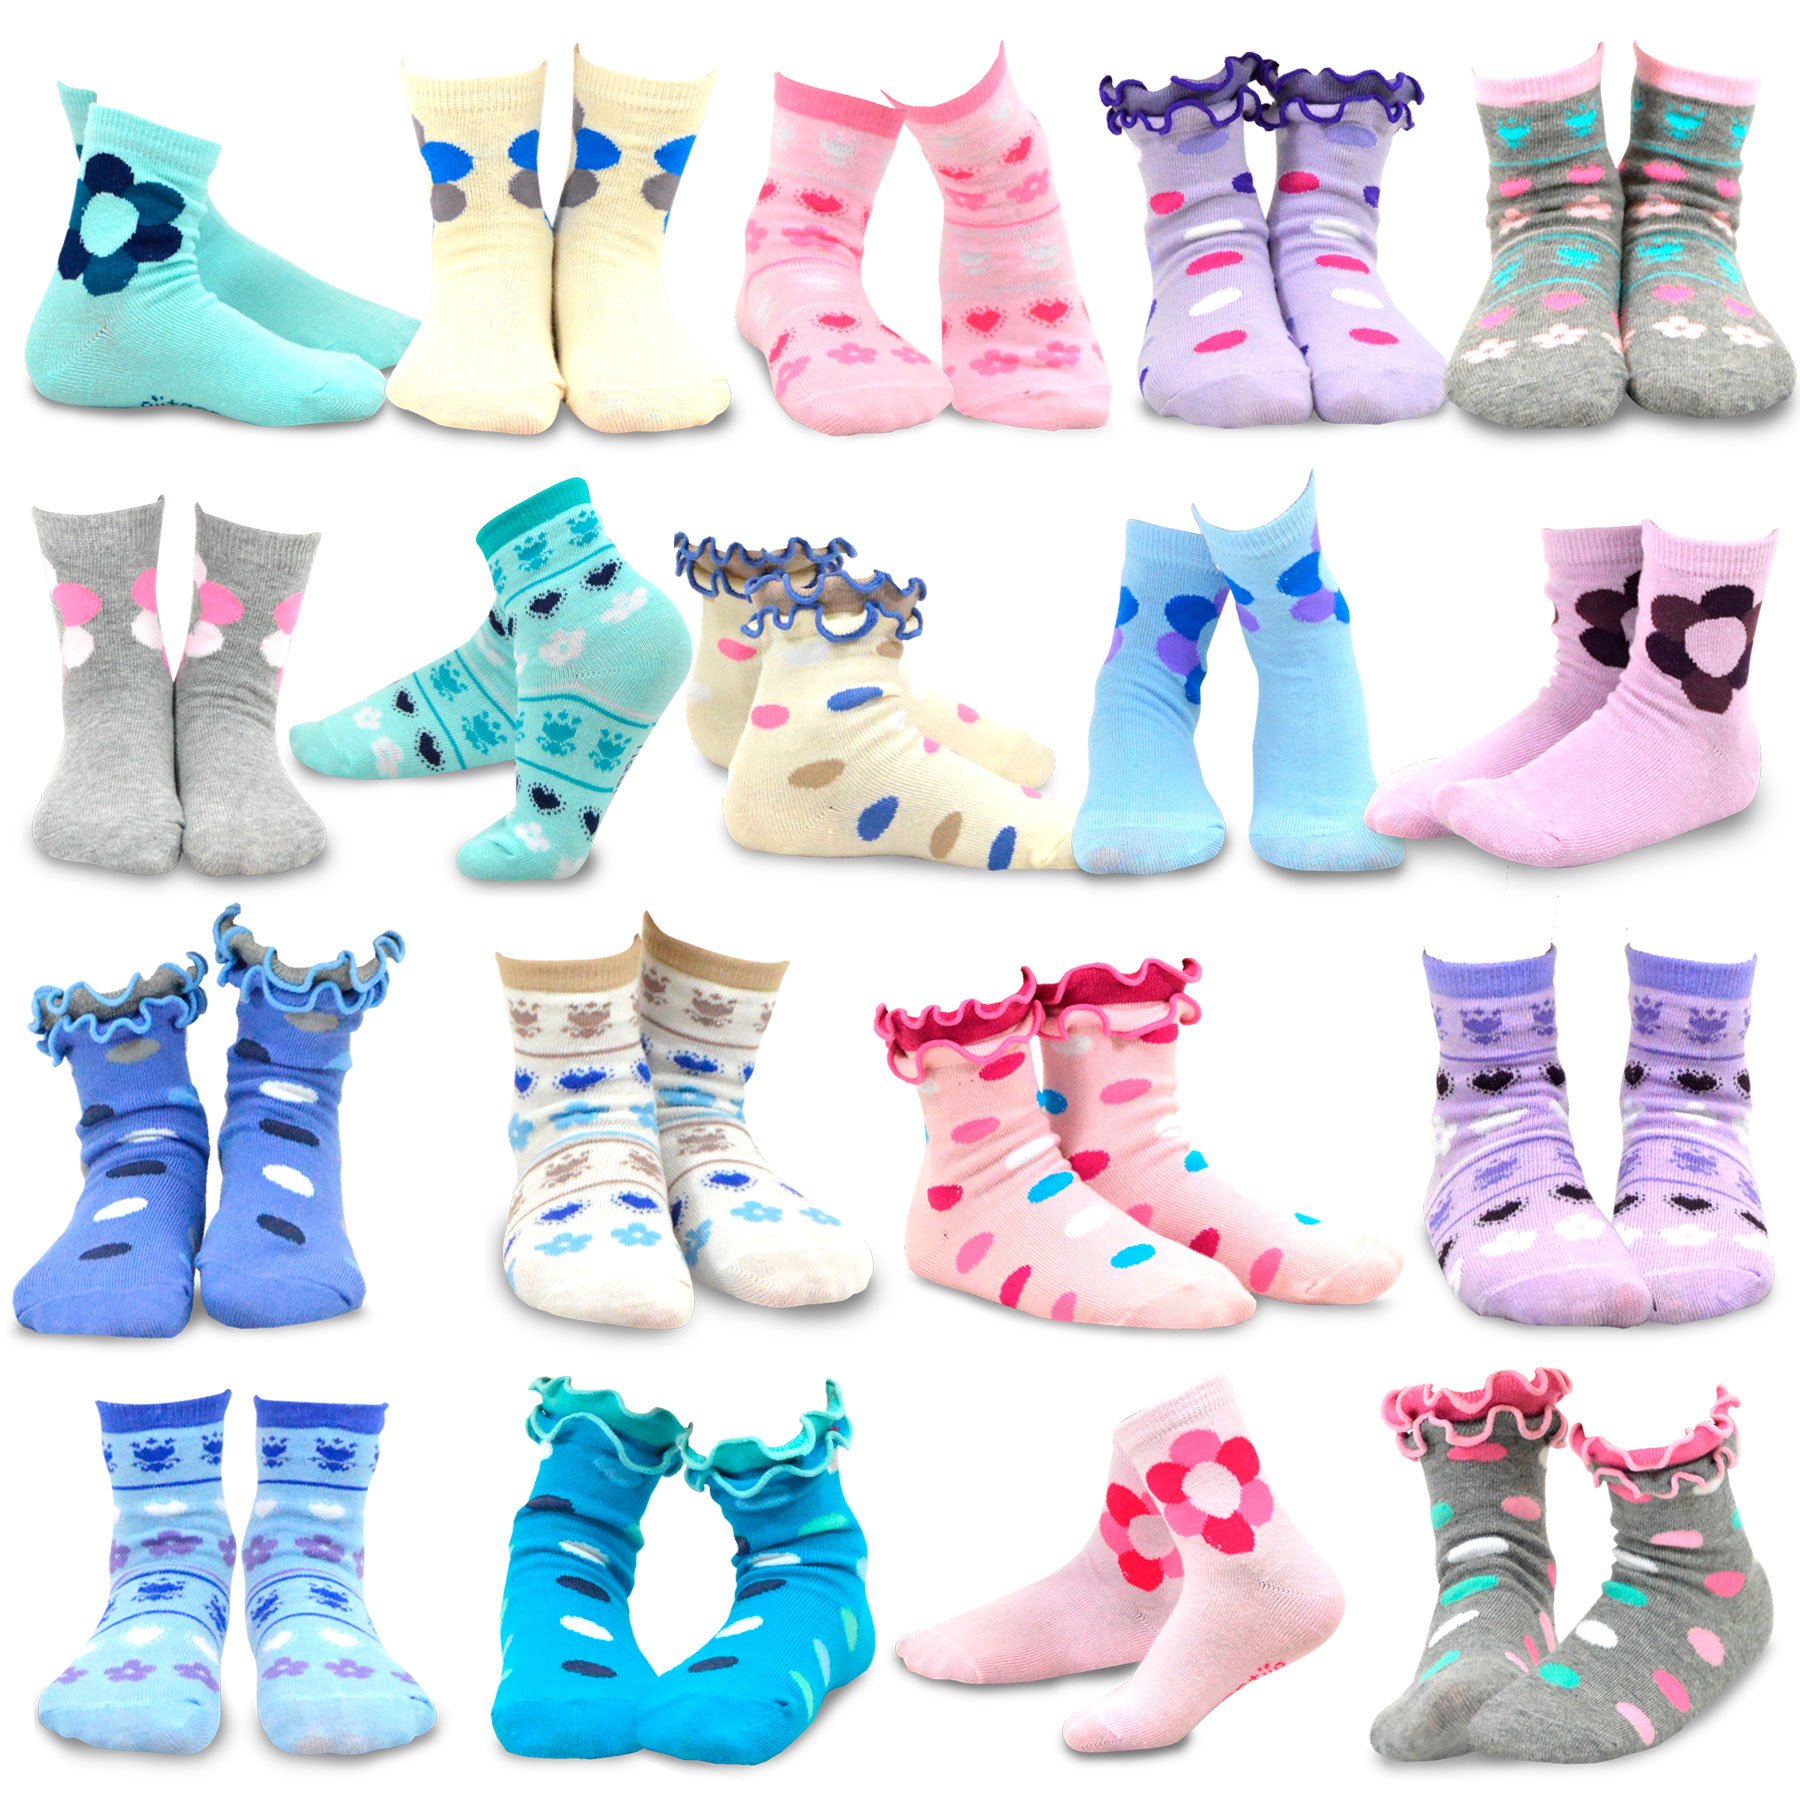 TeeHee Little Girls and Toddler Cute Novelty and Fashion Cotton Crew Socks 18 Pair Pack Gift Box